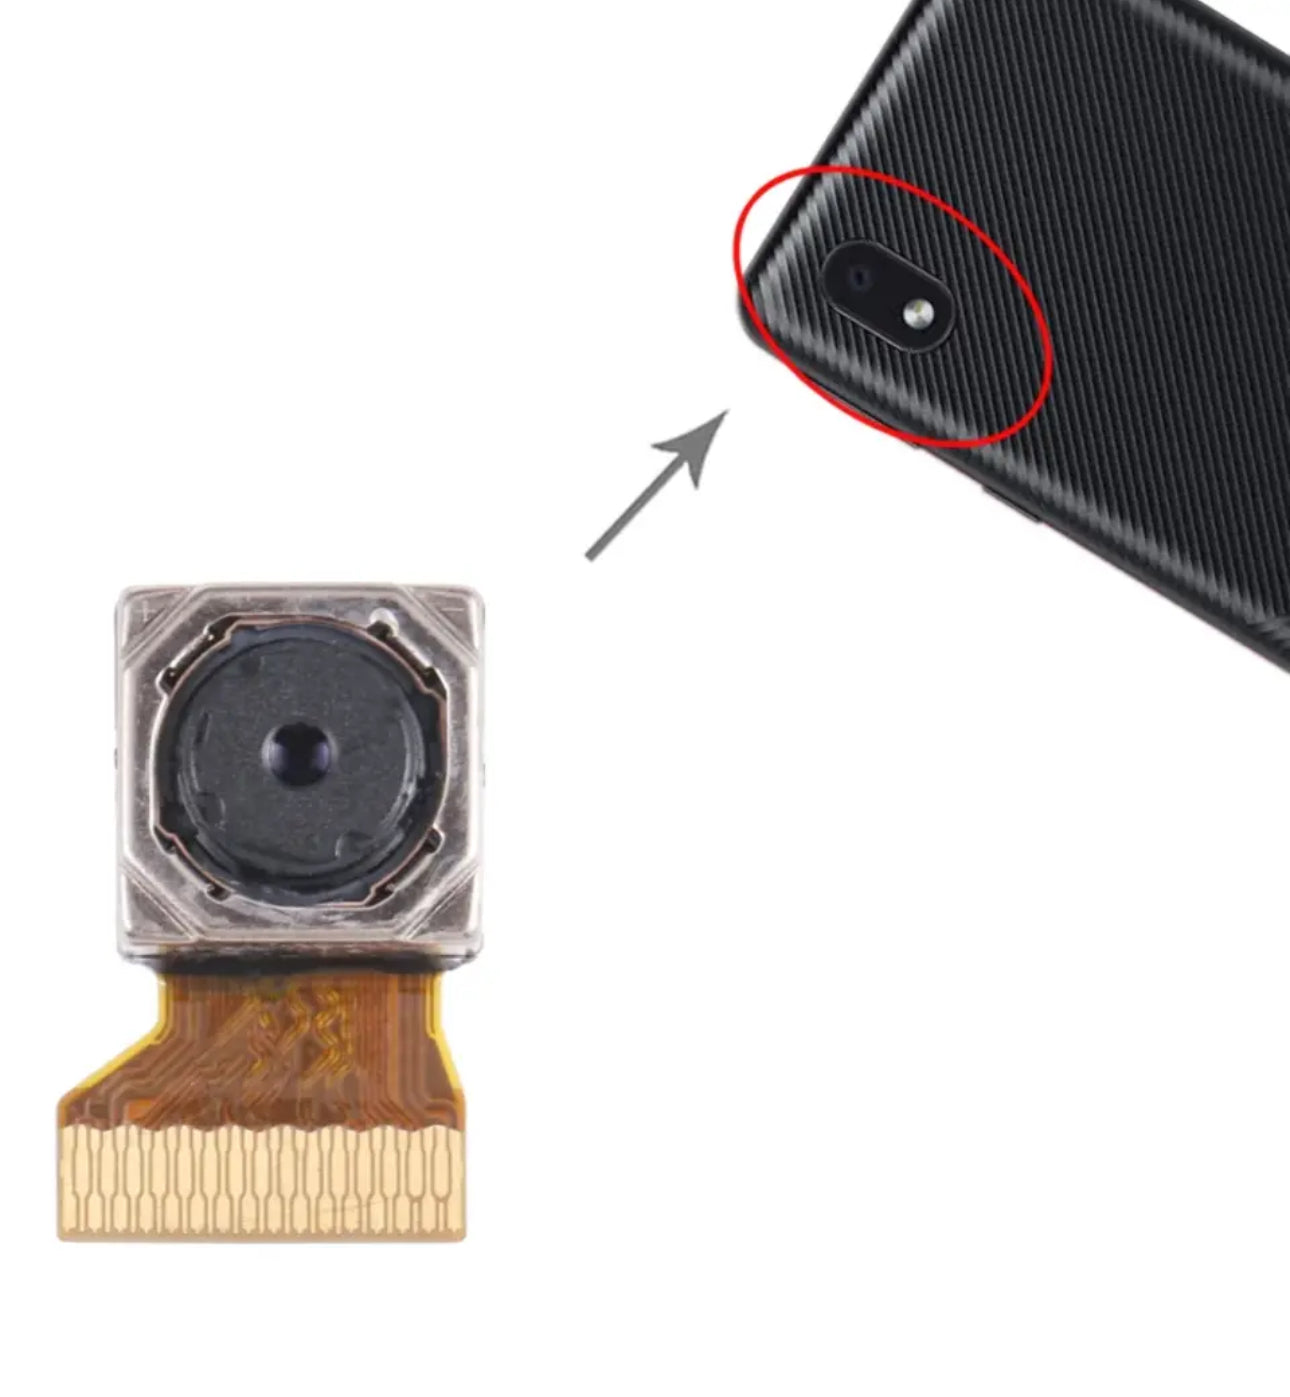 Samsung Galaxy A01 Core Replacement rear camera